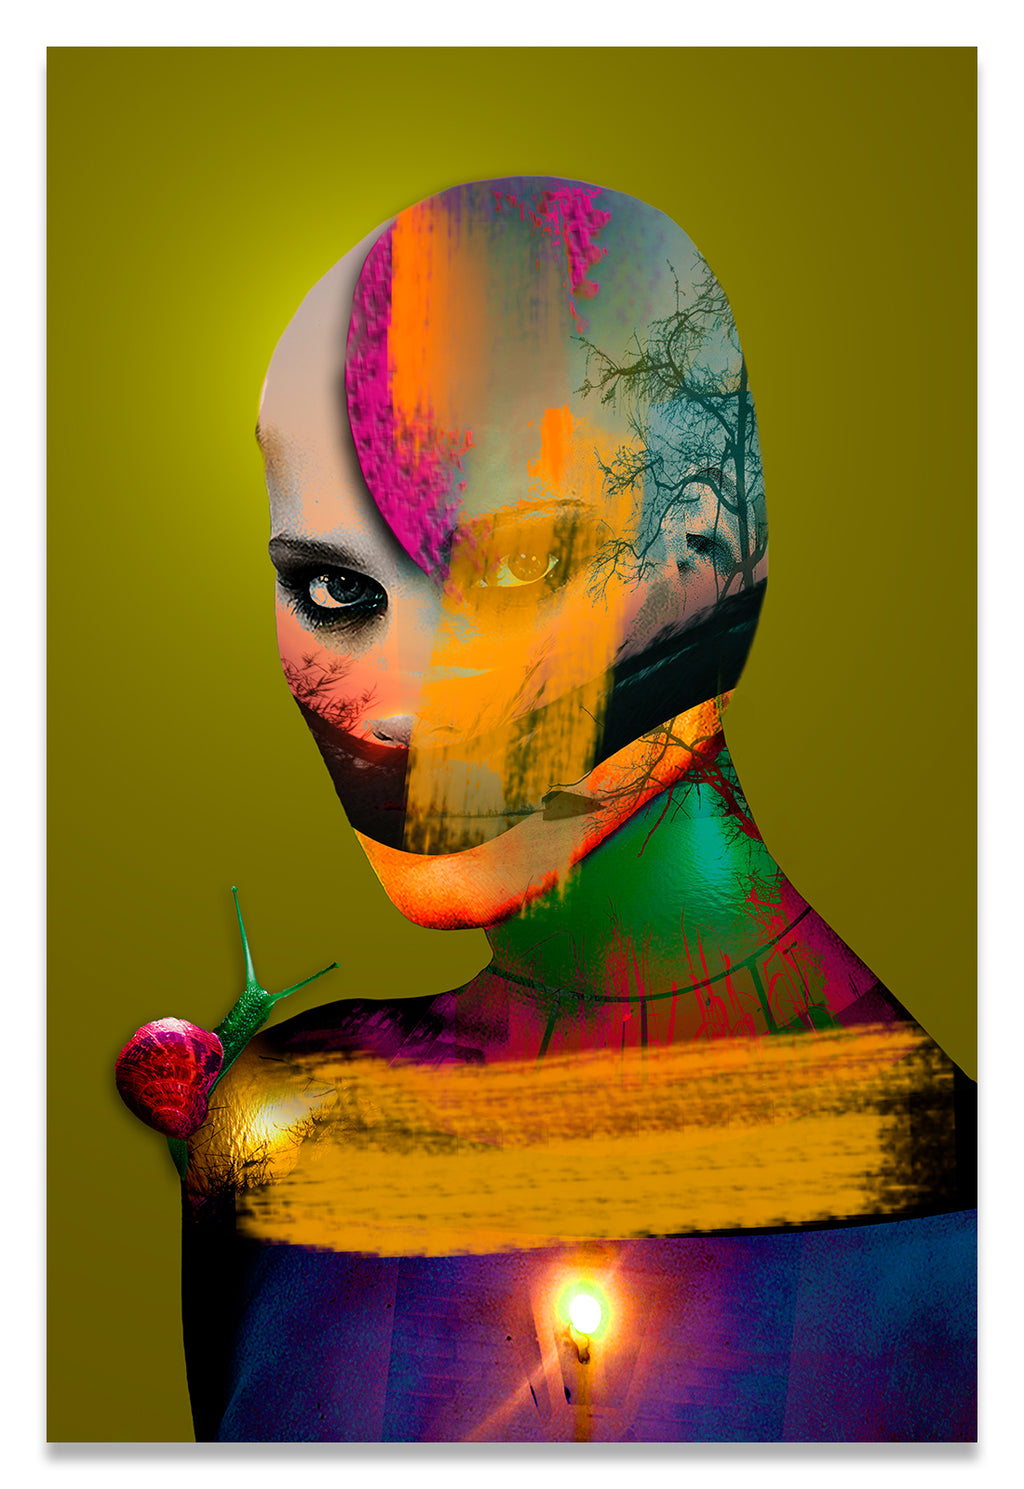 Bold Color Portrait of a Bald Woman Covered in Paint with a Snail on her Shoulder.